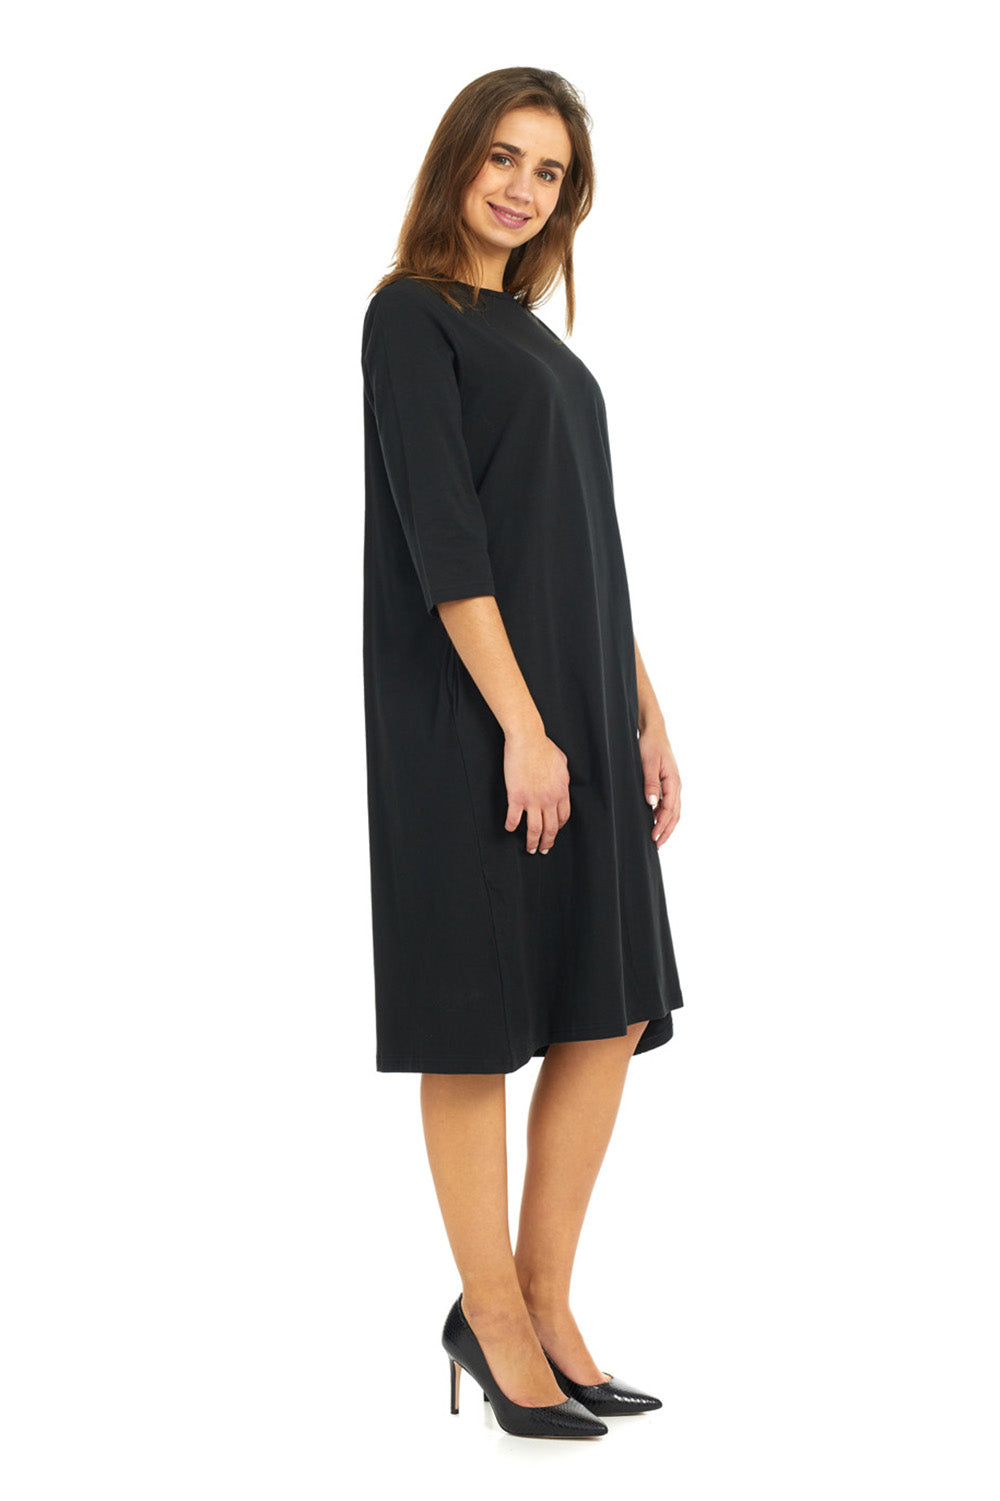 Soft and cozy cotton black t-shirt dress with pockets. modest 3/4 sleeves and knee length